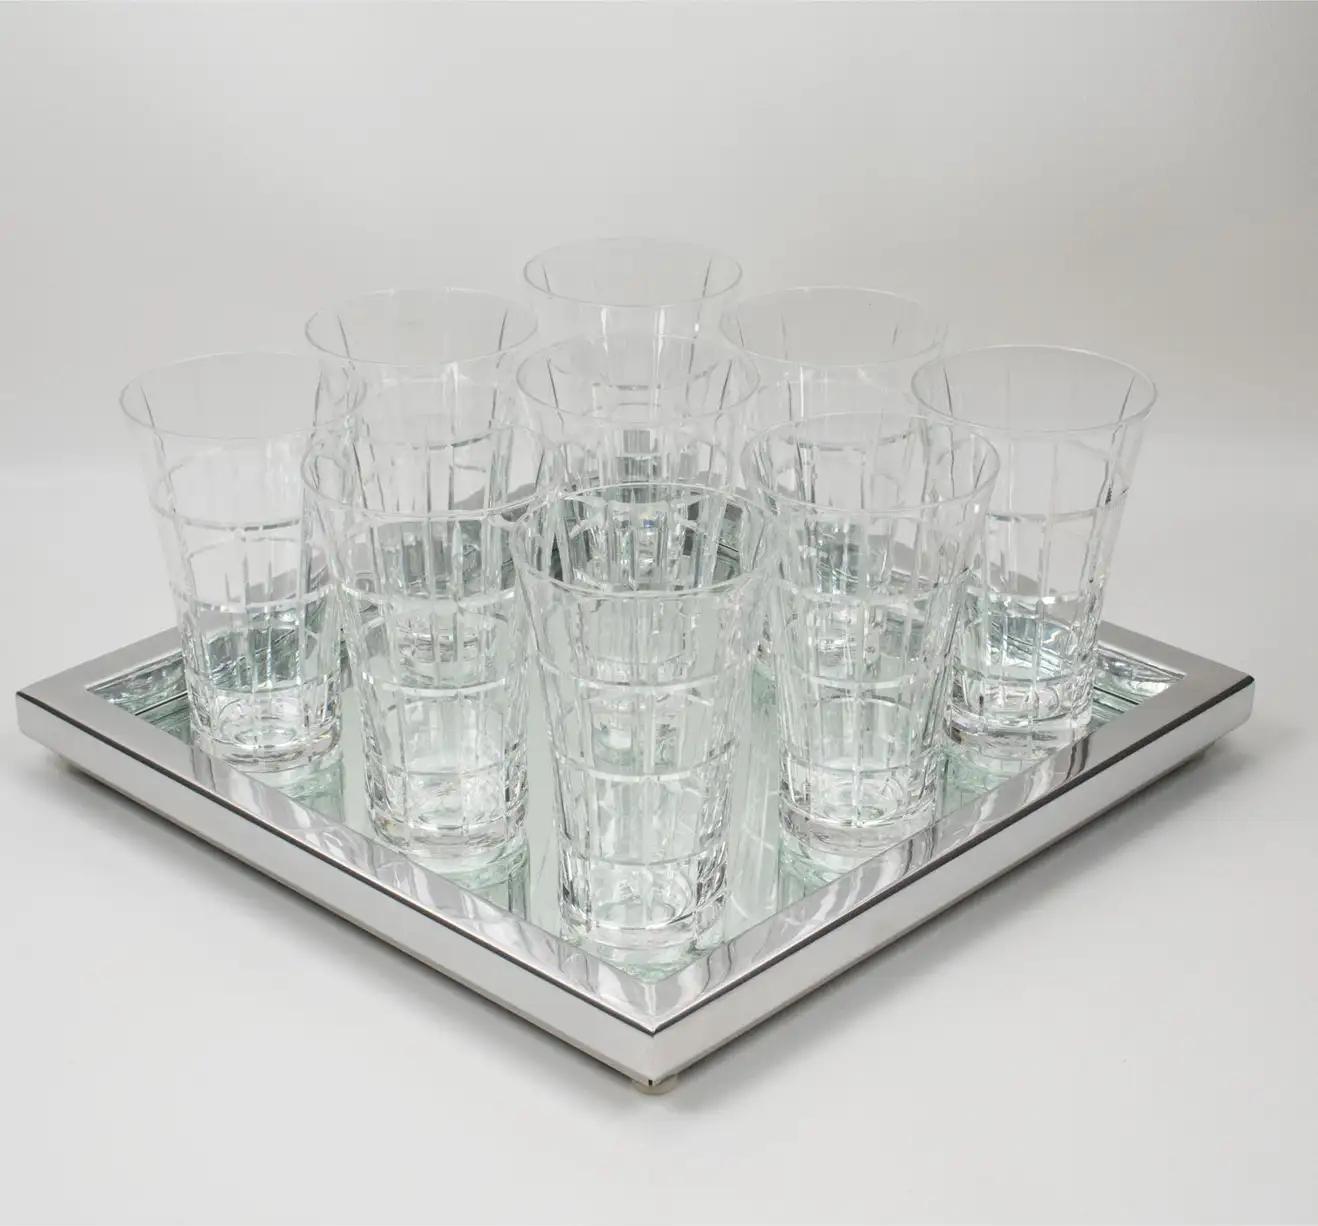 Daum Nancy France hand-crafted this elegant crystal barware serving set in the 1970s. The bar set features nine tulip tumbler glasses with deep geometric etching. Each item is labeled with the 